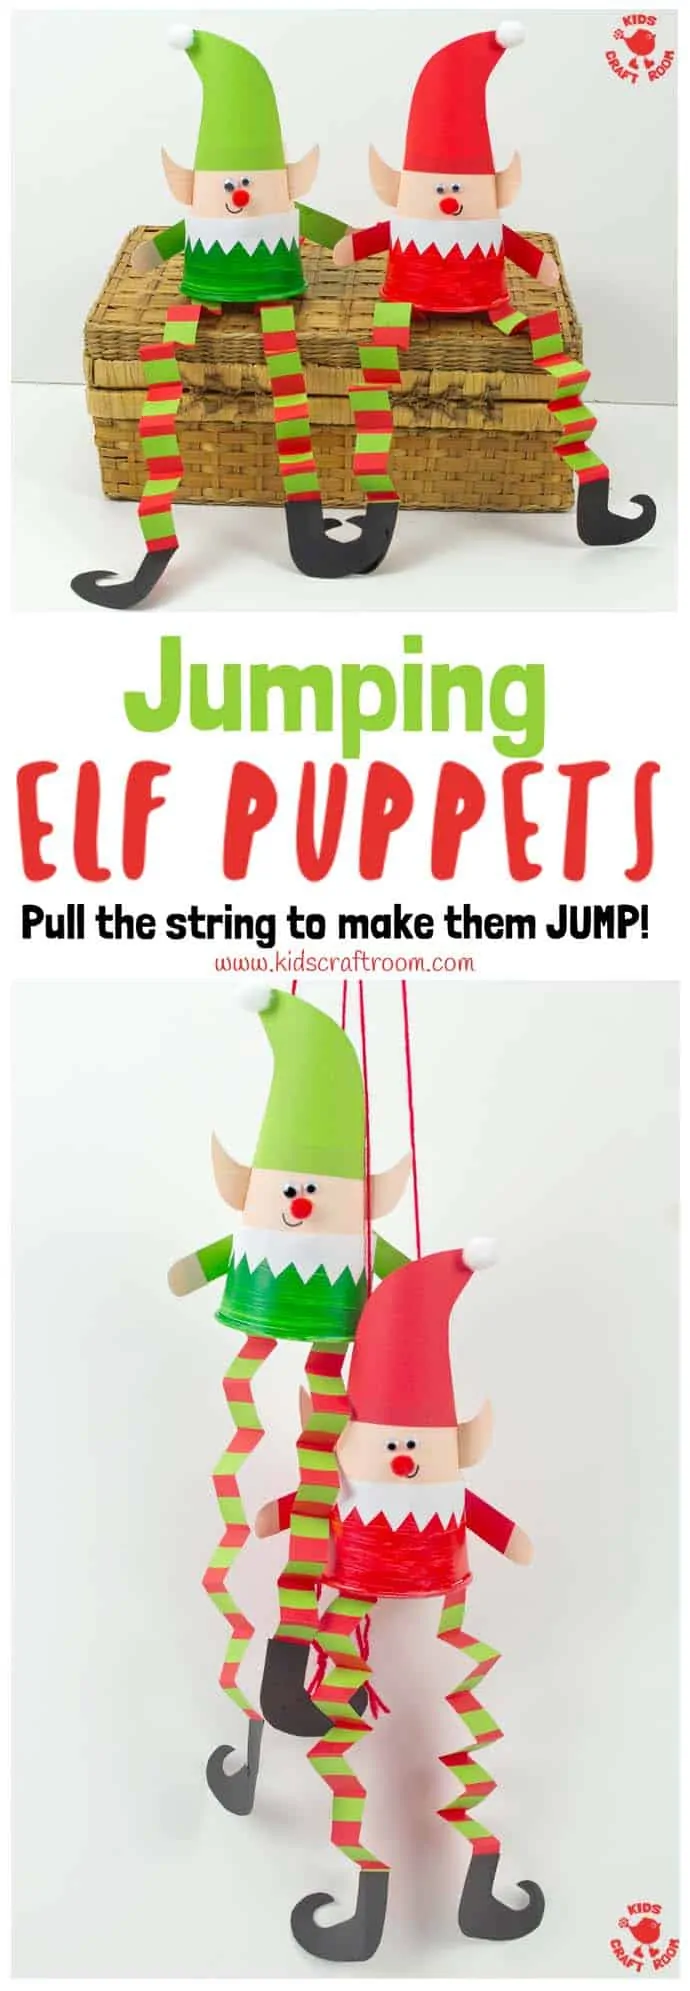 A collage of elf puppets overlaid with text saying "Jumping Elf Puppets". The top picture is of two elves sitting side by side on a basket. The bottom picture shows them hanging up.